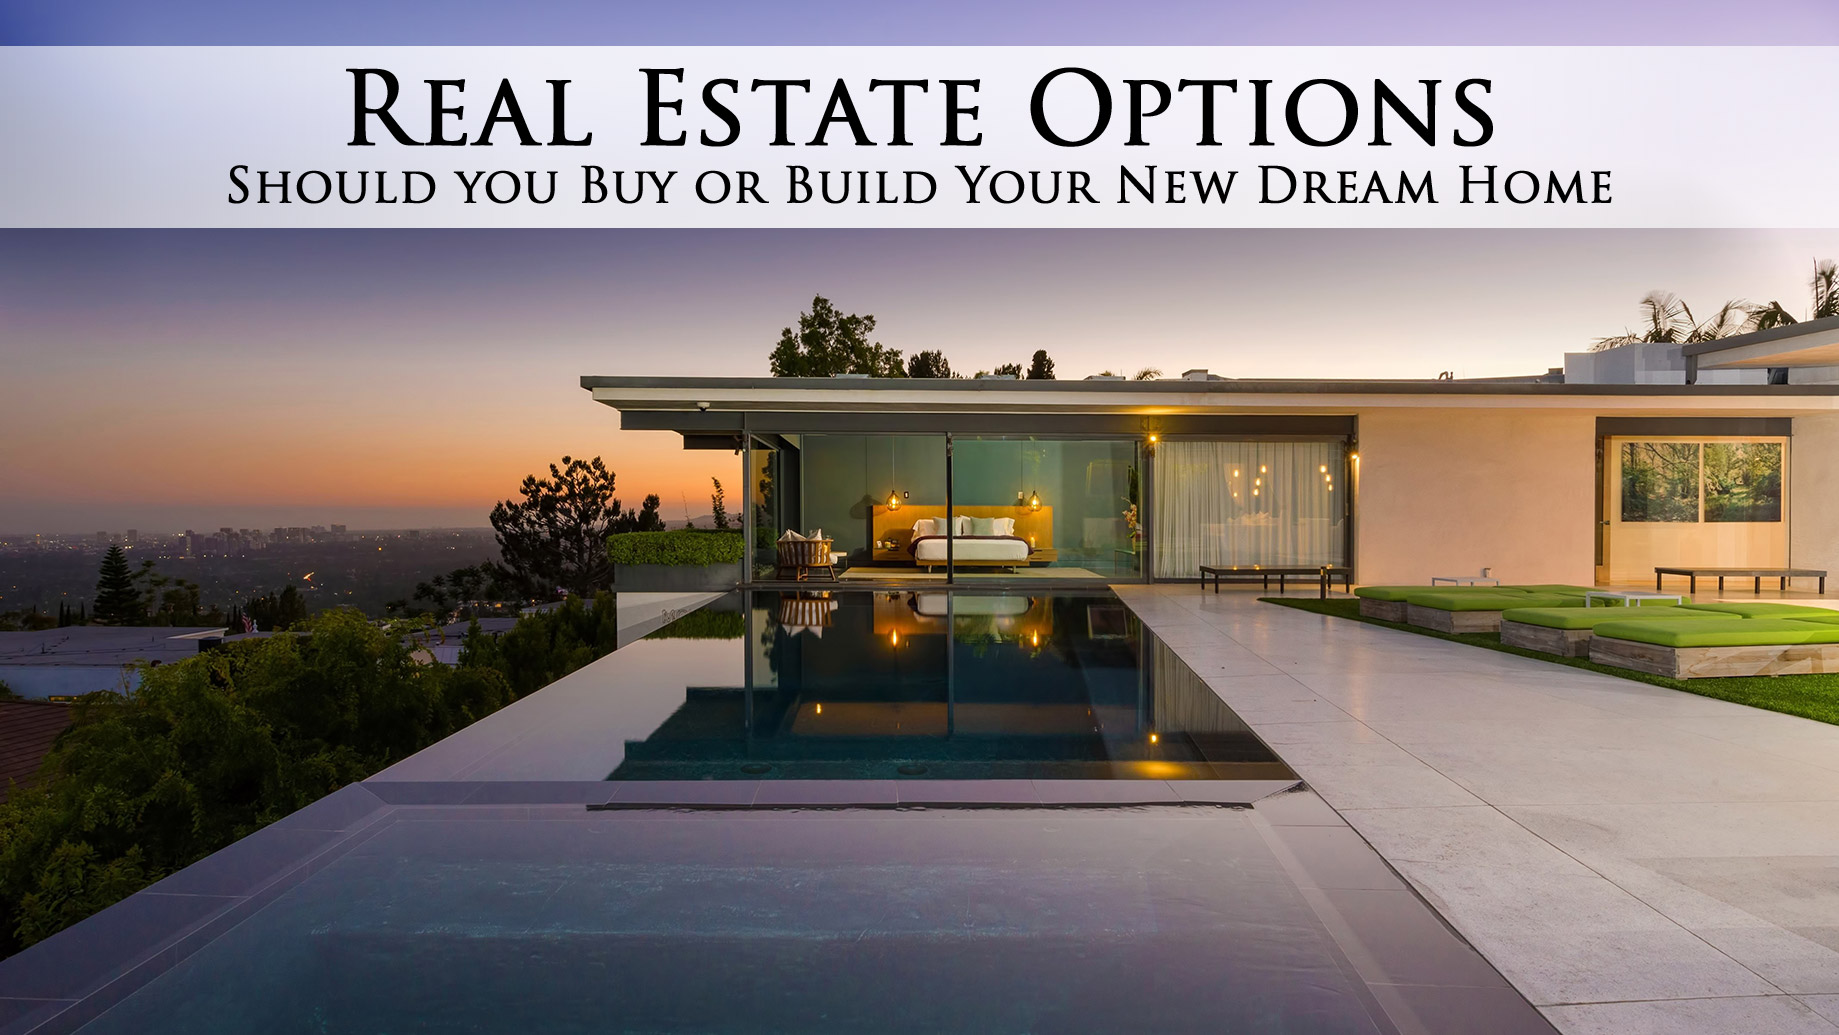 Real Estate Options - Should you Buy or Build Your New Dream Home